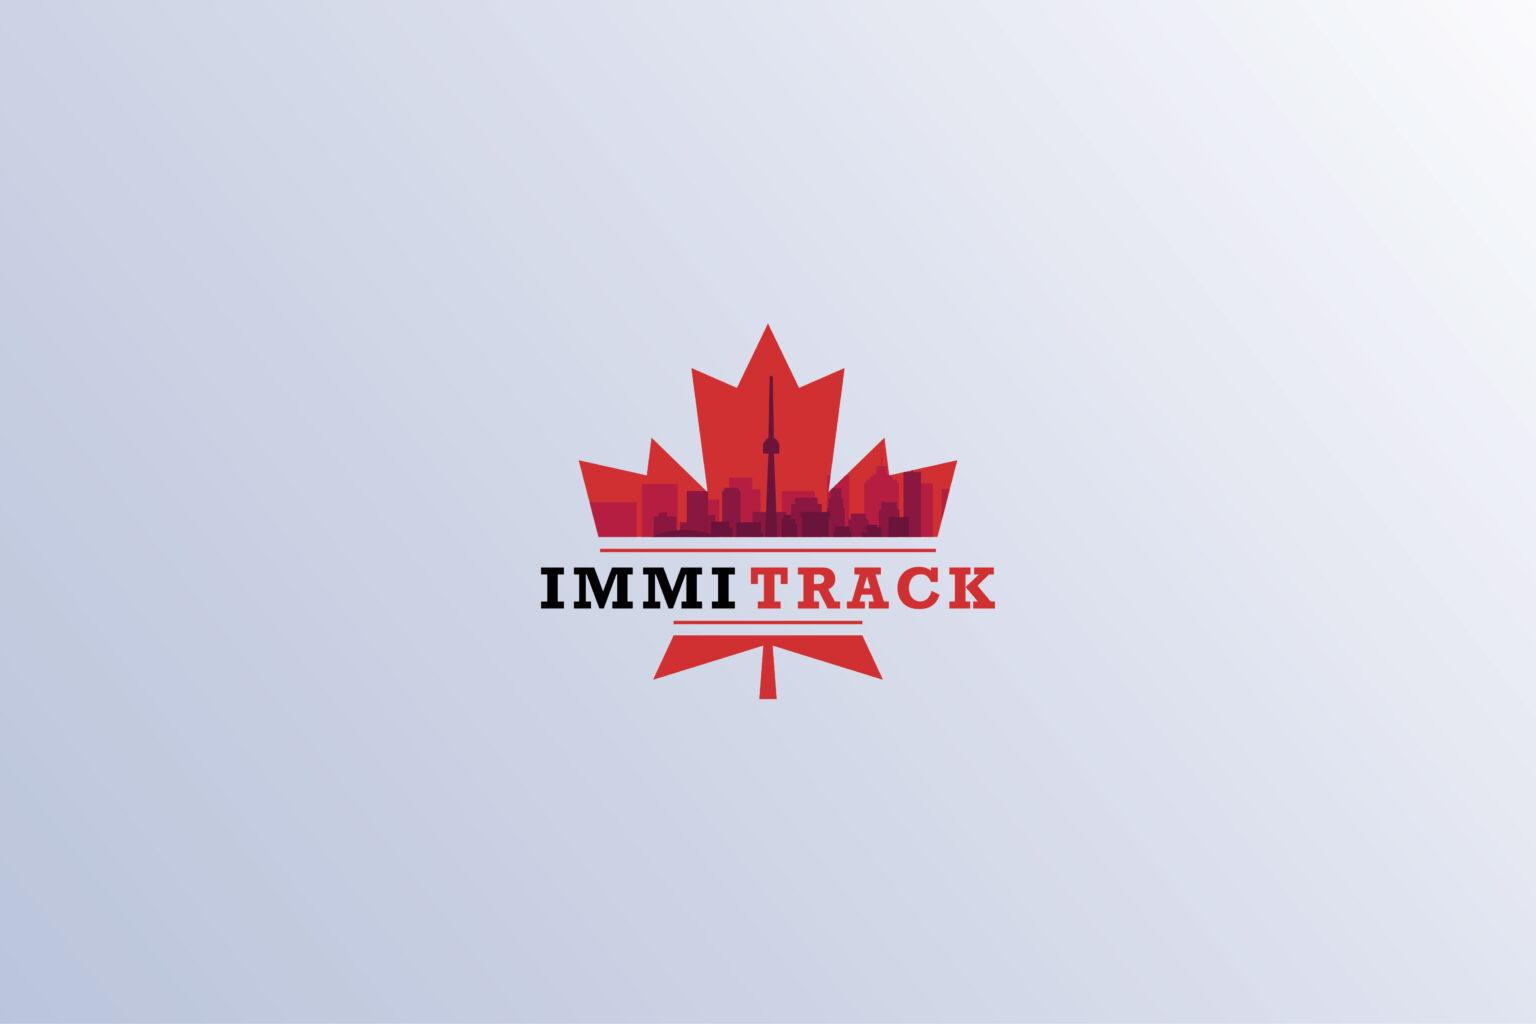 ImmiTrack – Easing the Canadian Immigration Journey